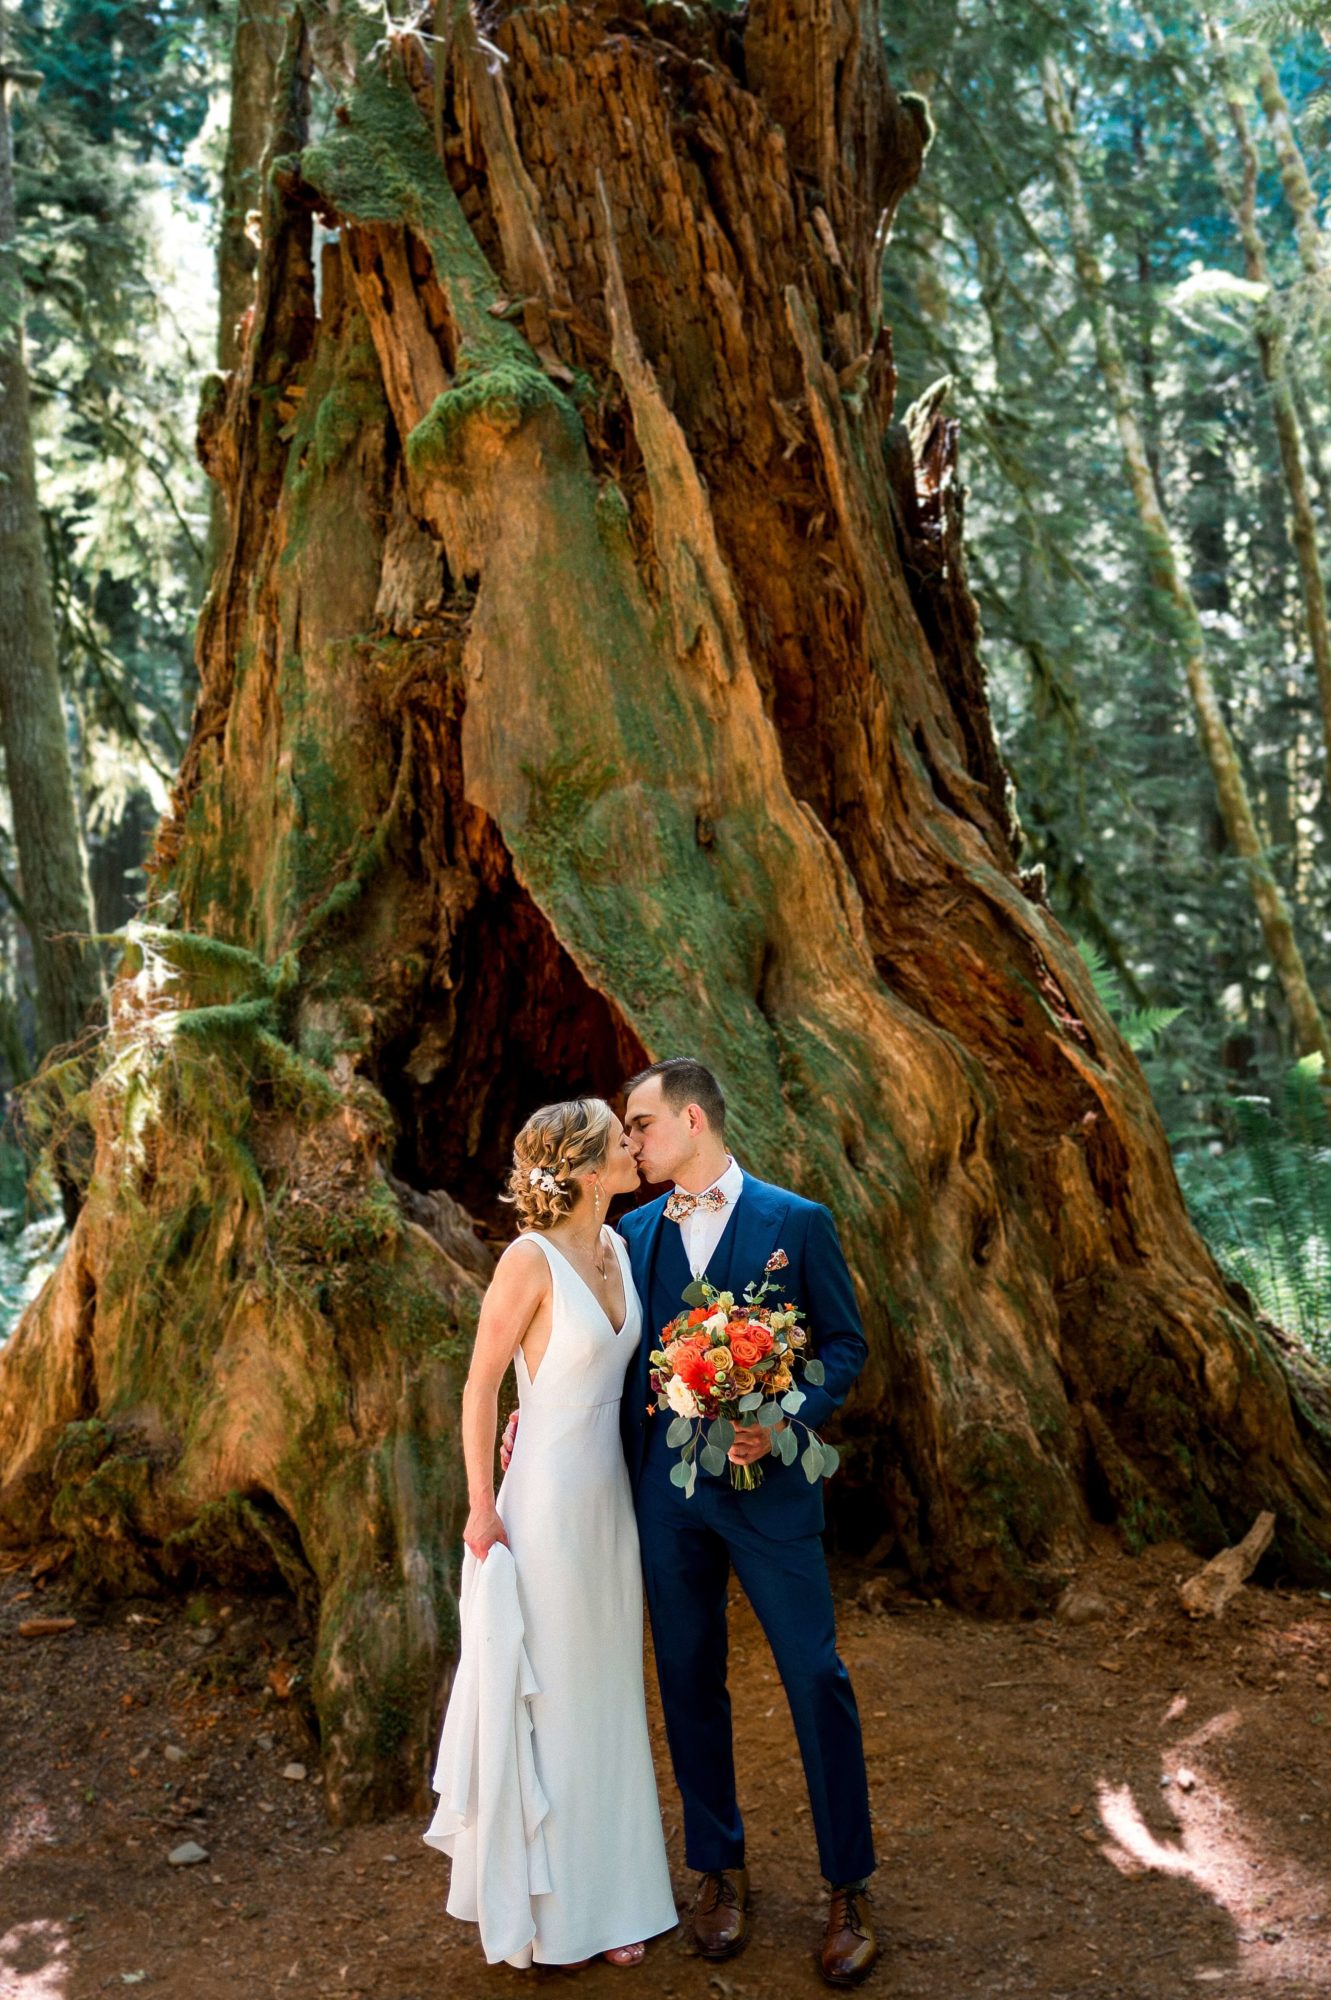 Bride and groom with an old-growth tree stump at Fern Acres Forks Wedding Venue